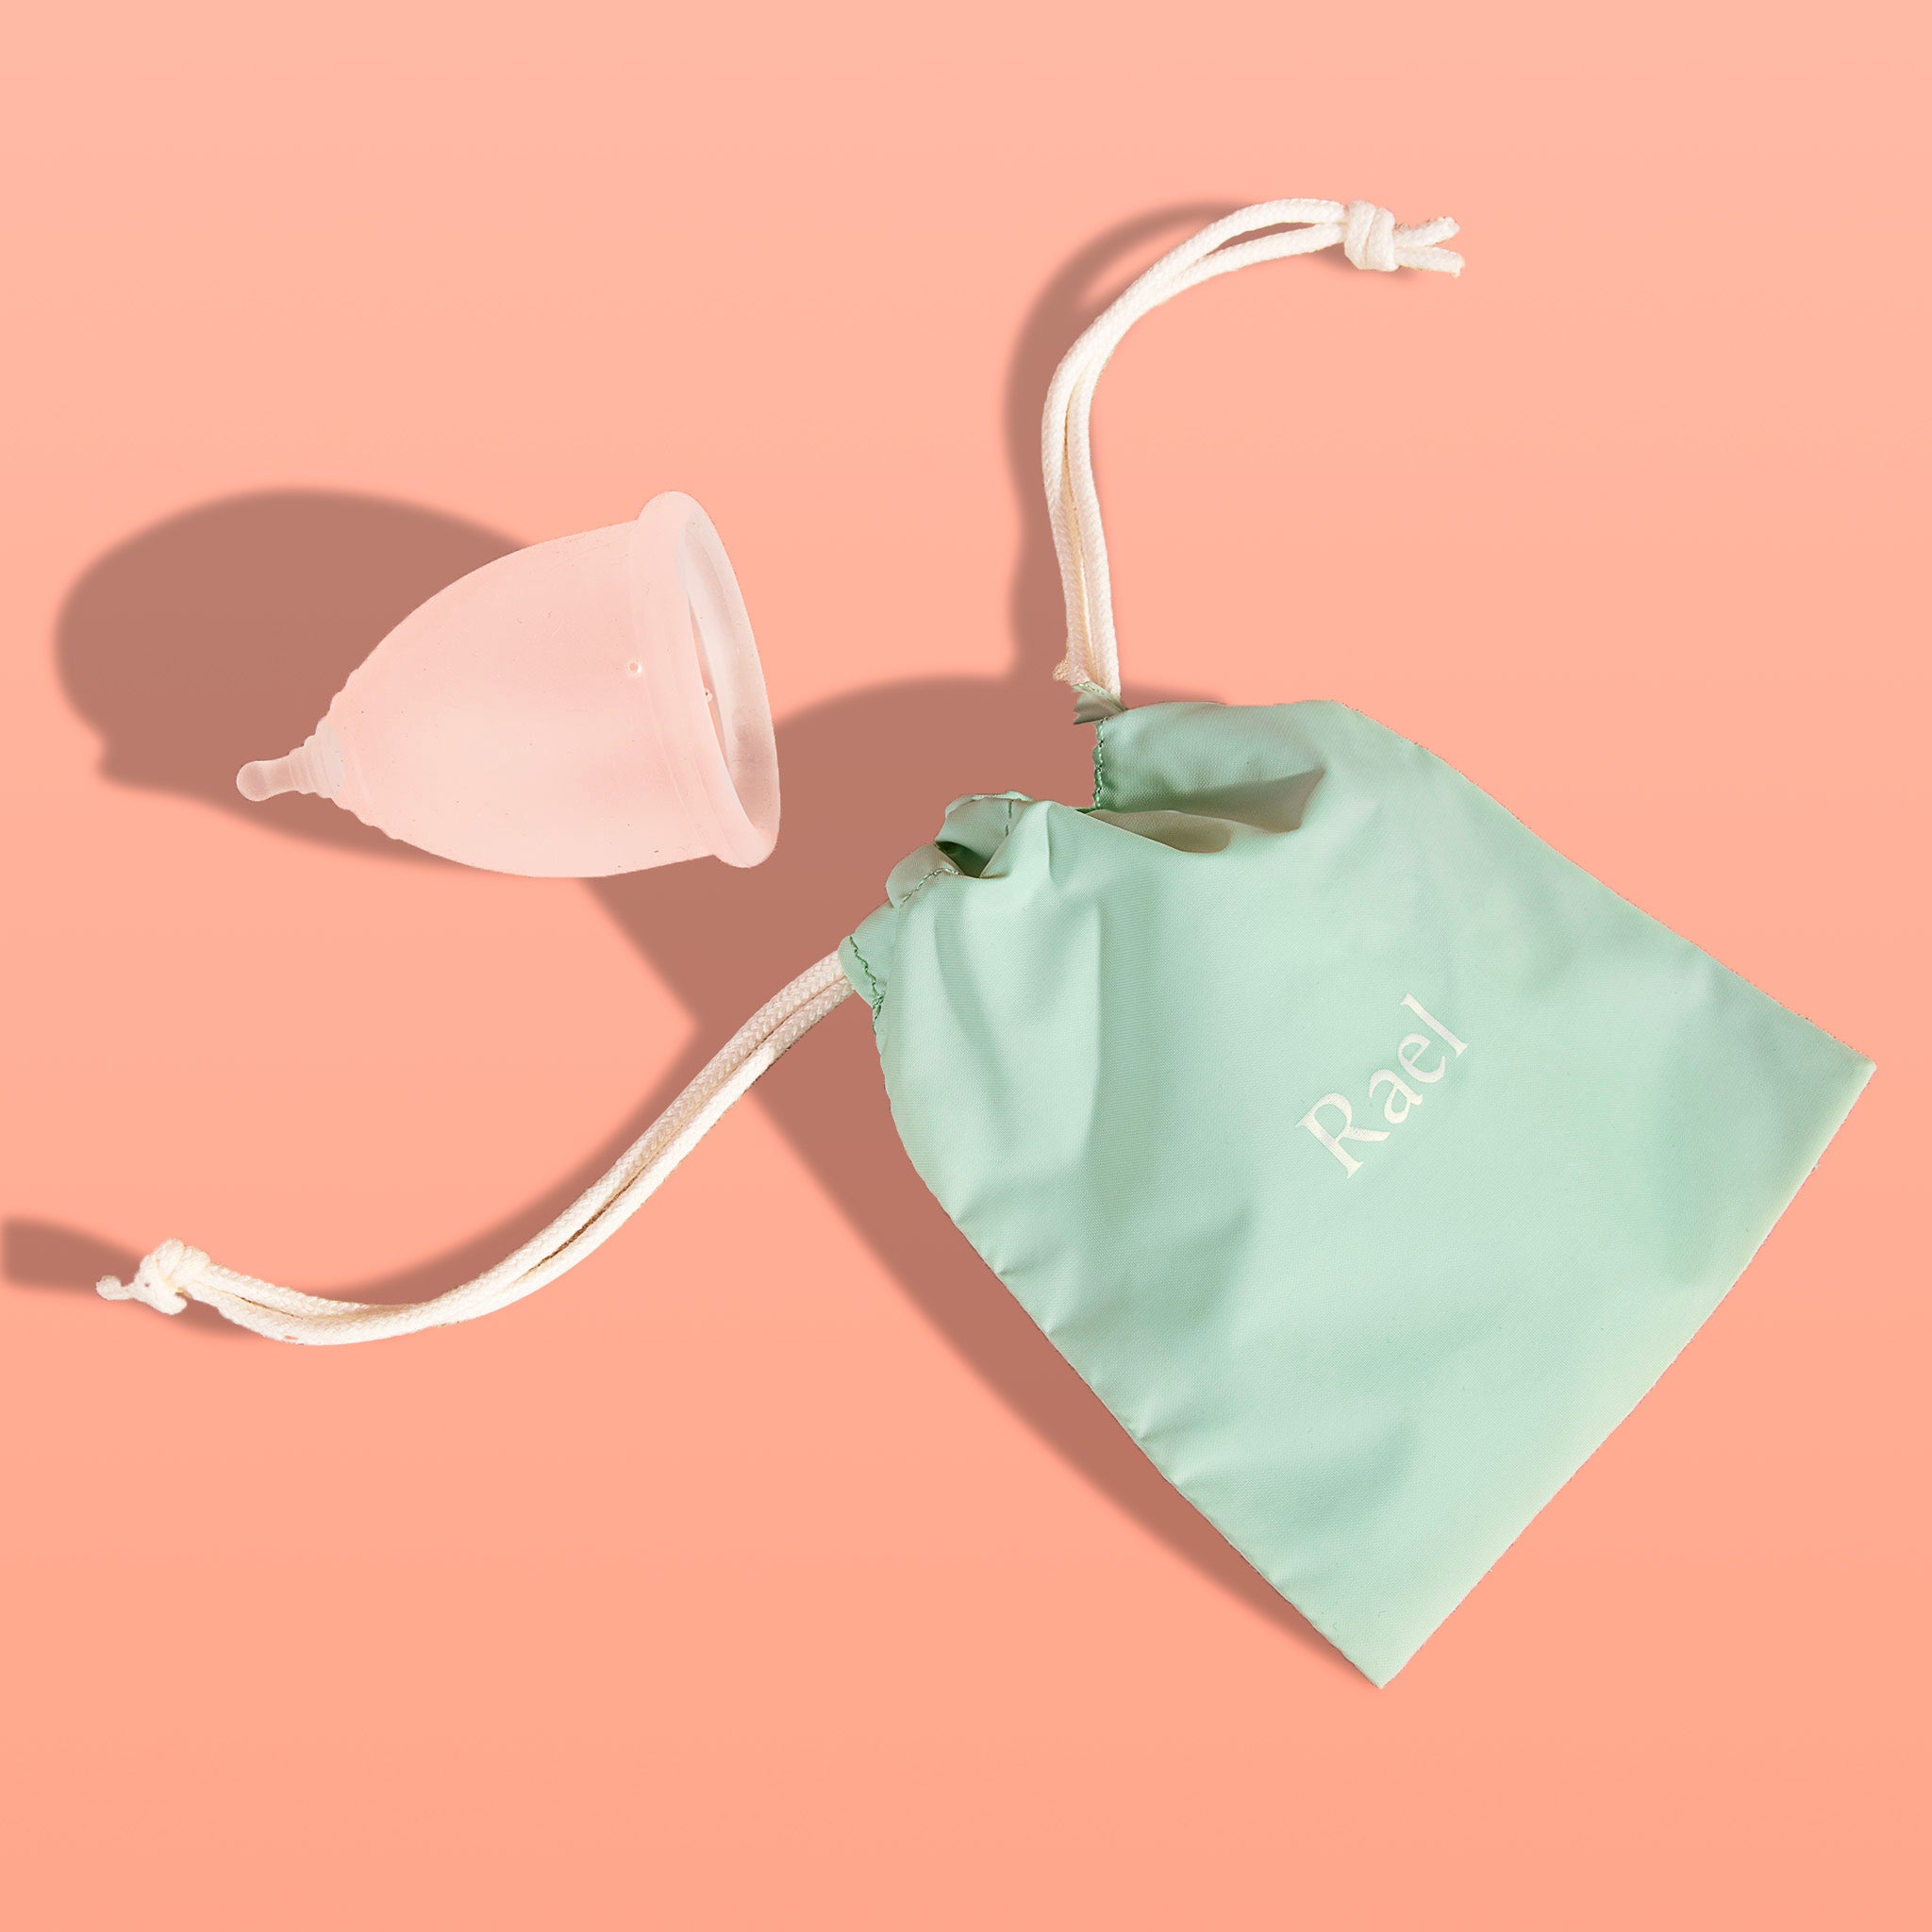 Review of #RAEL Reusable Menstrual Cup Case by Selena, 77 votes